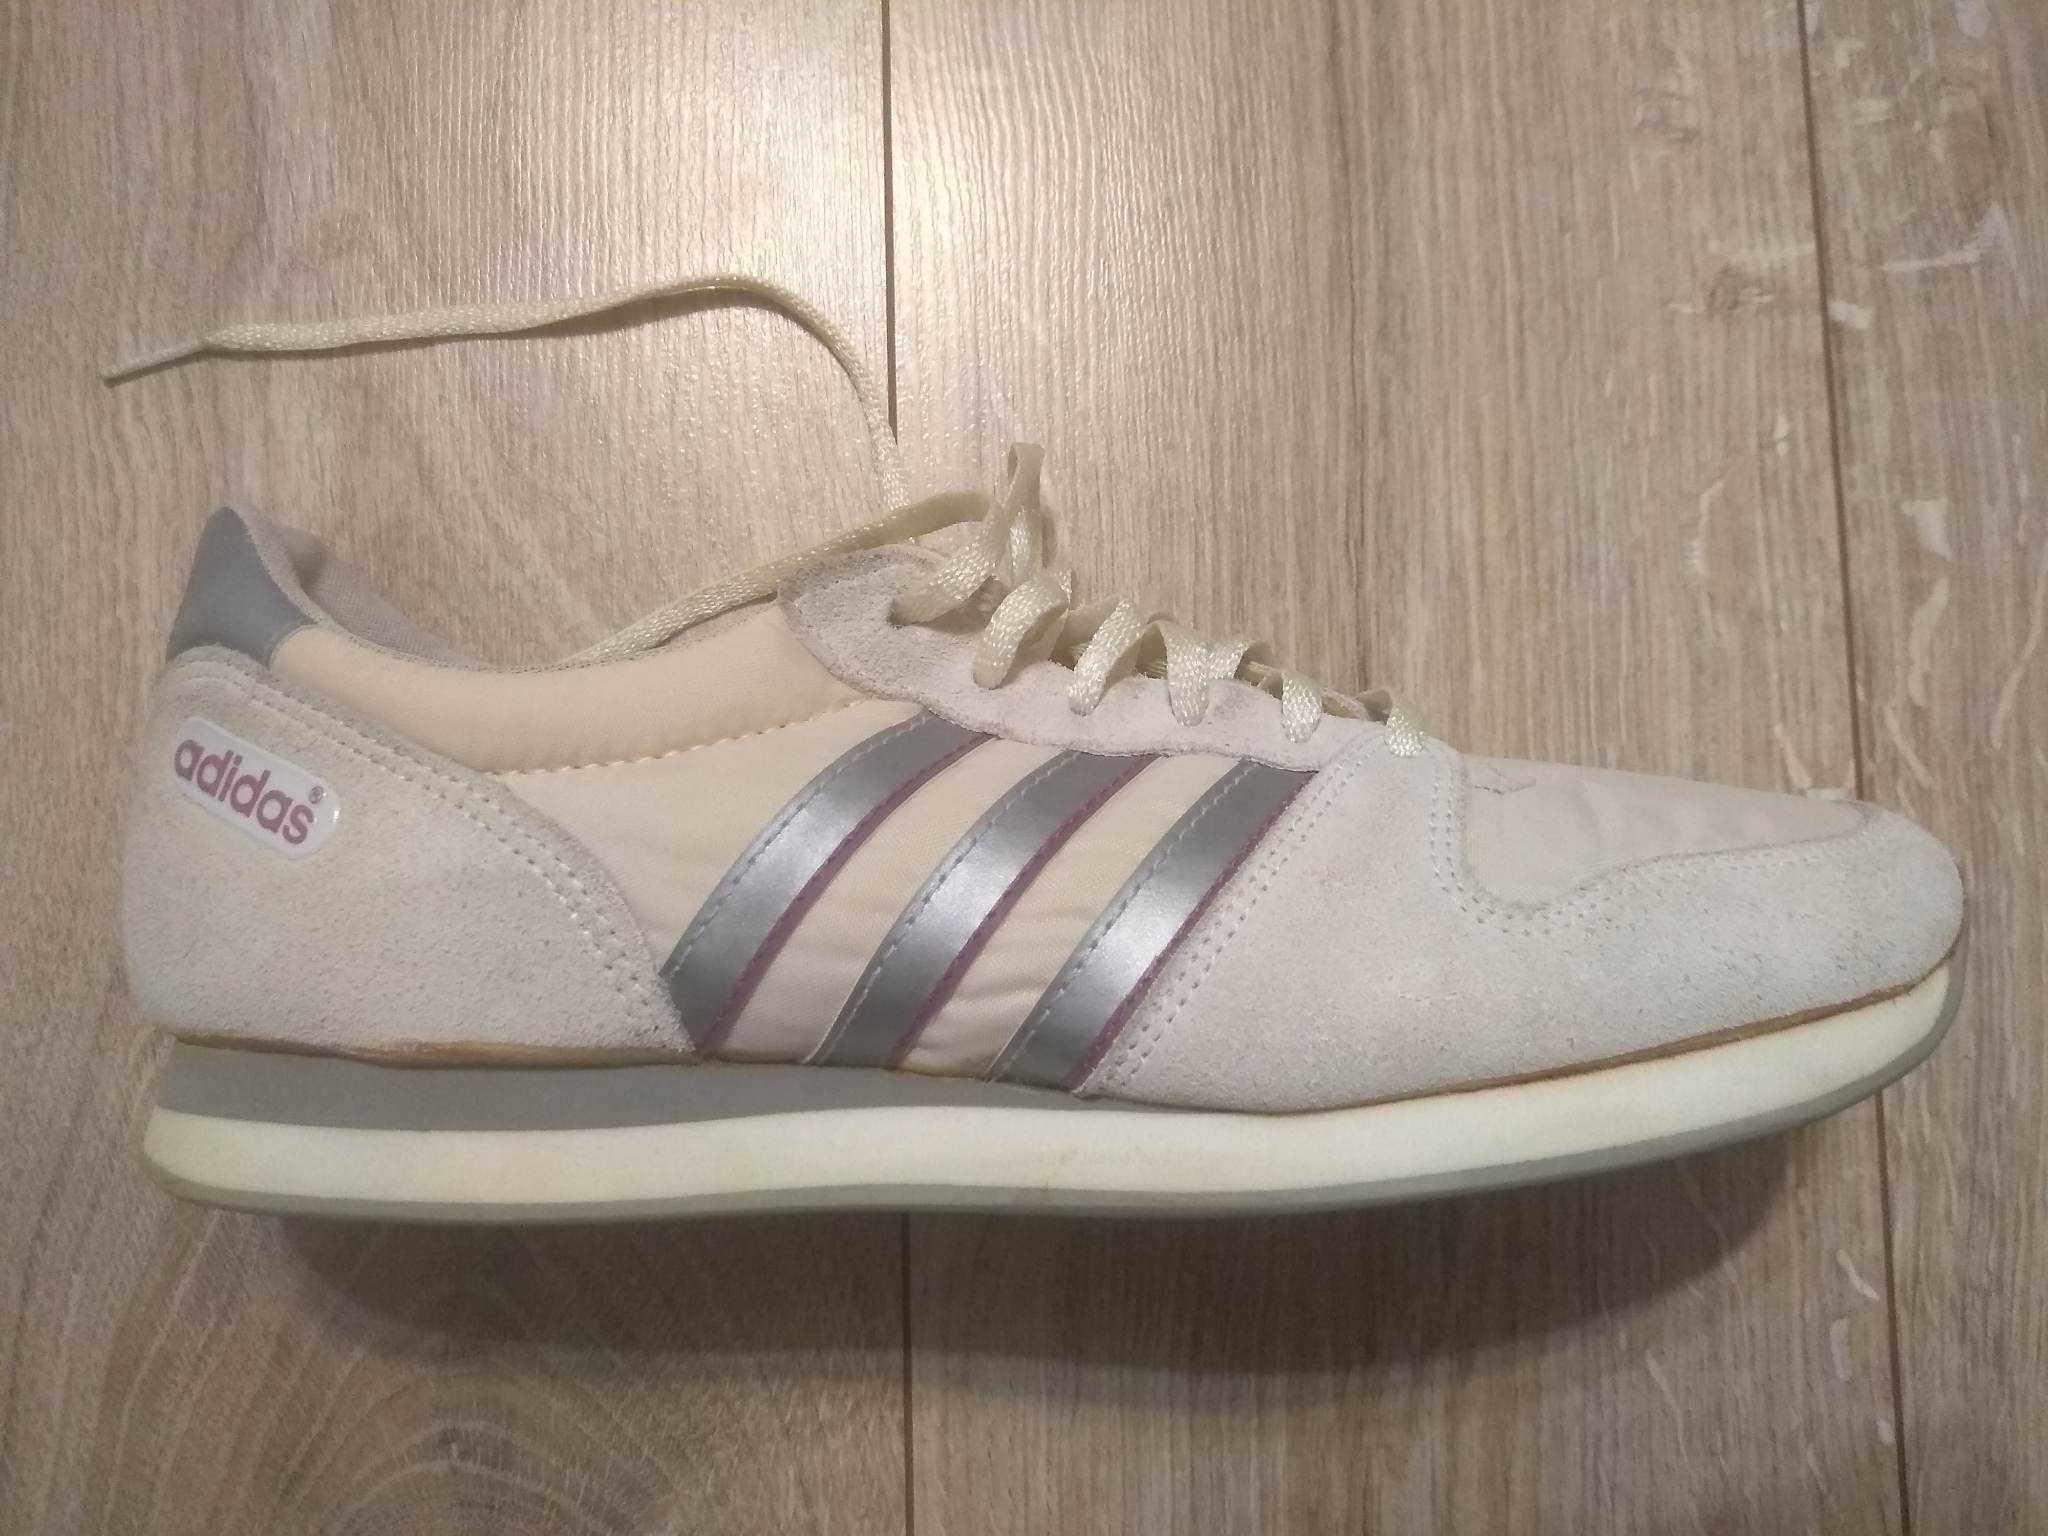 Adidas vintage shoes made in Korea  HOT RARE size 10,5